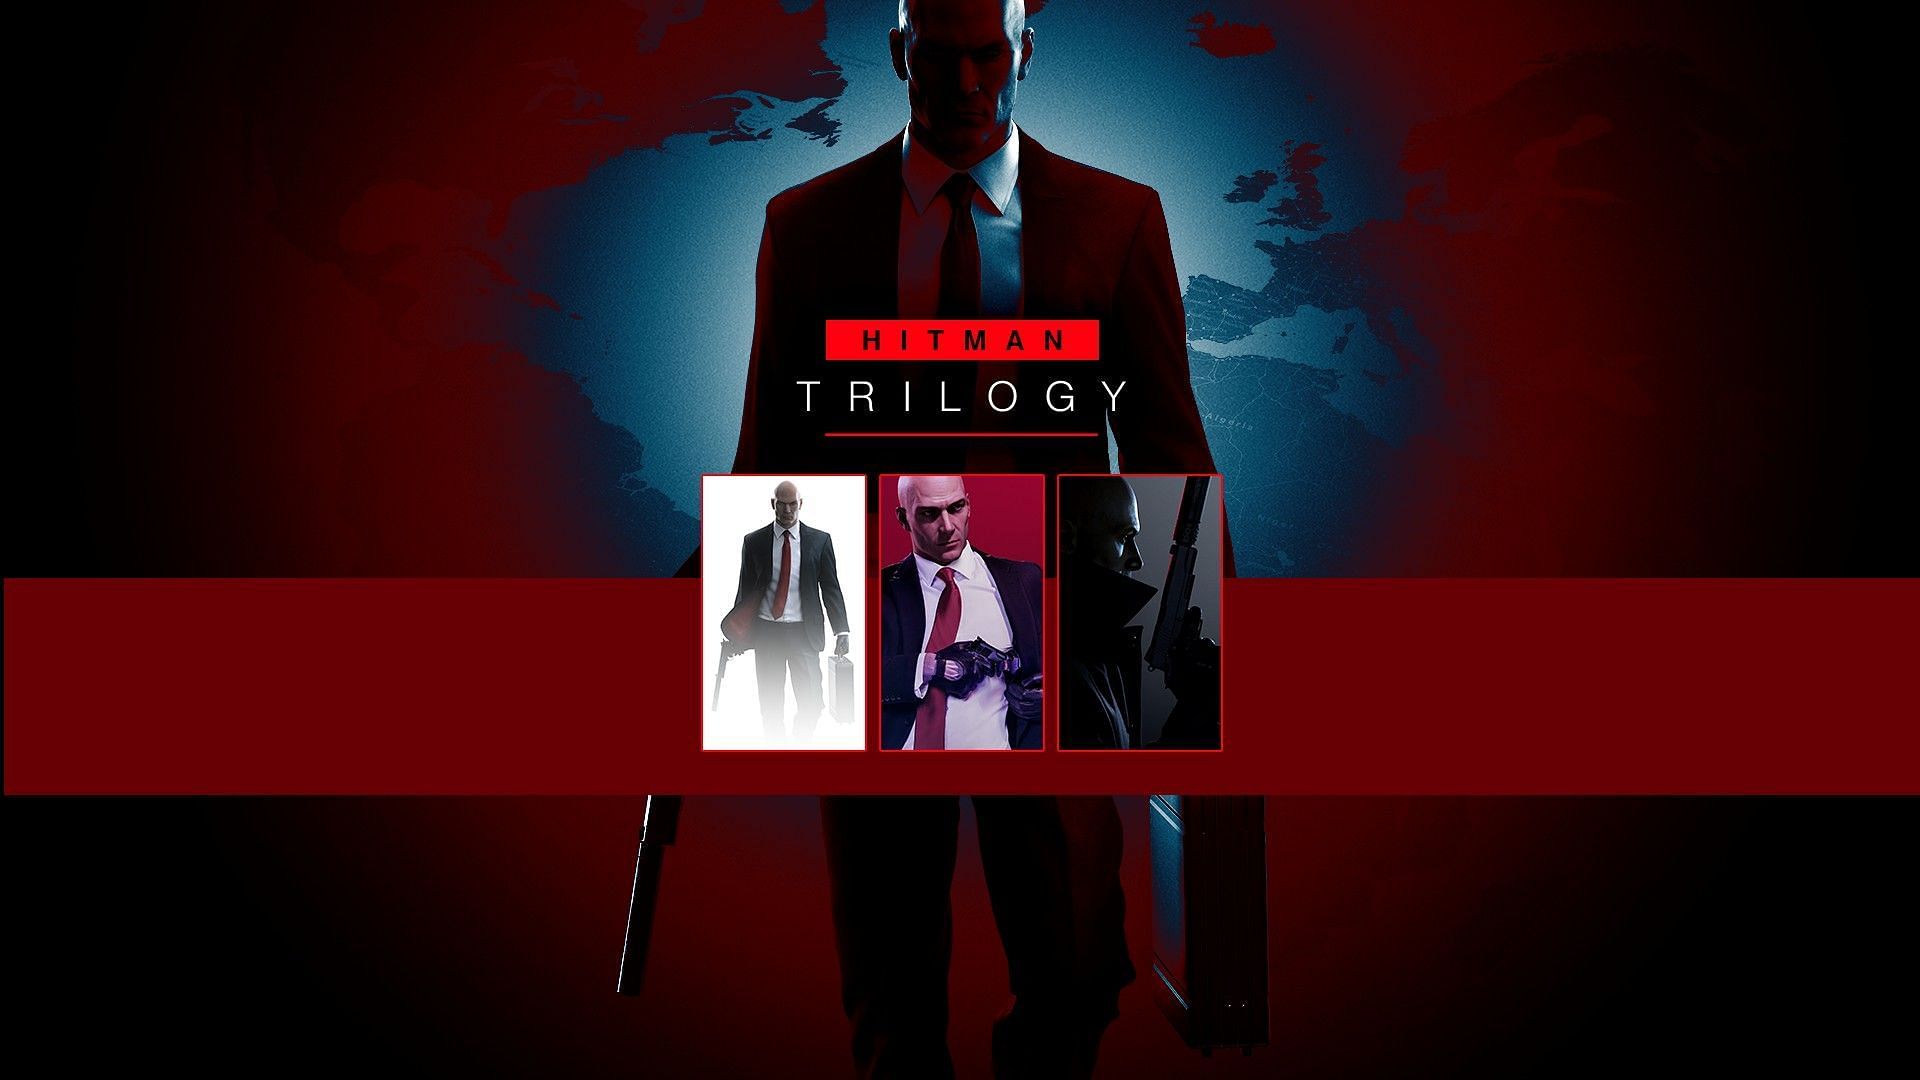 Hitman Trilogy is coming to the Xbox Game Pass (Image via Xbox Wire)